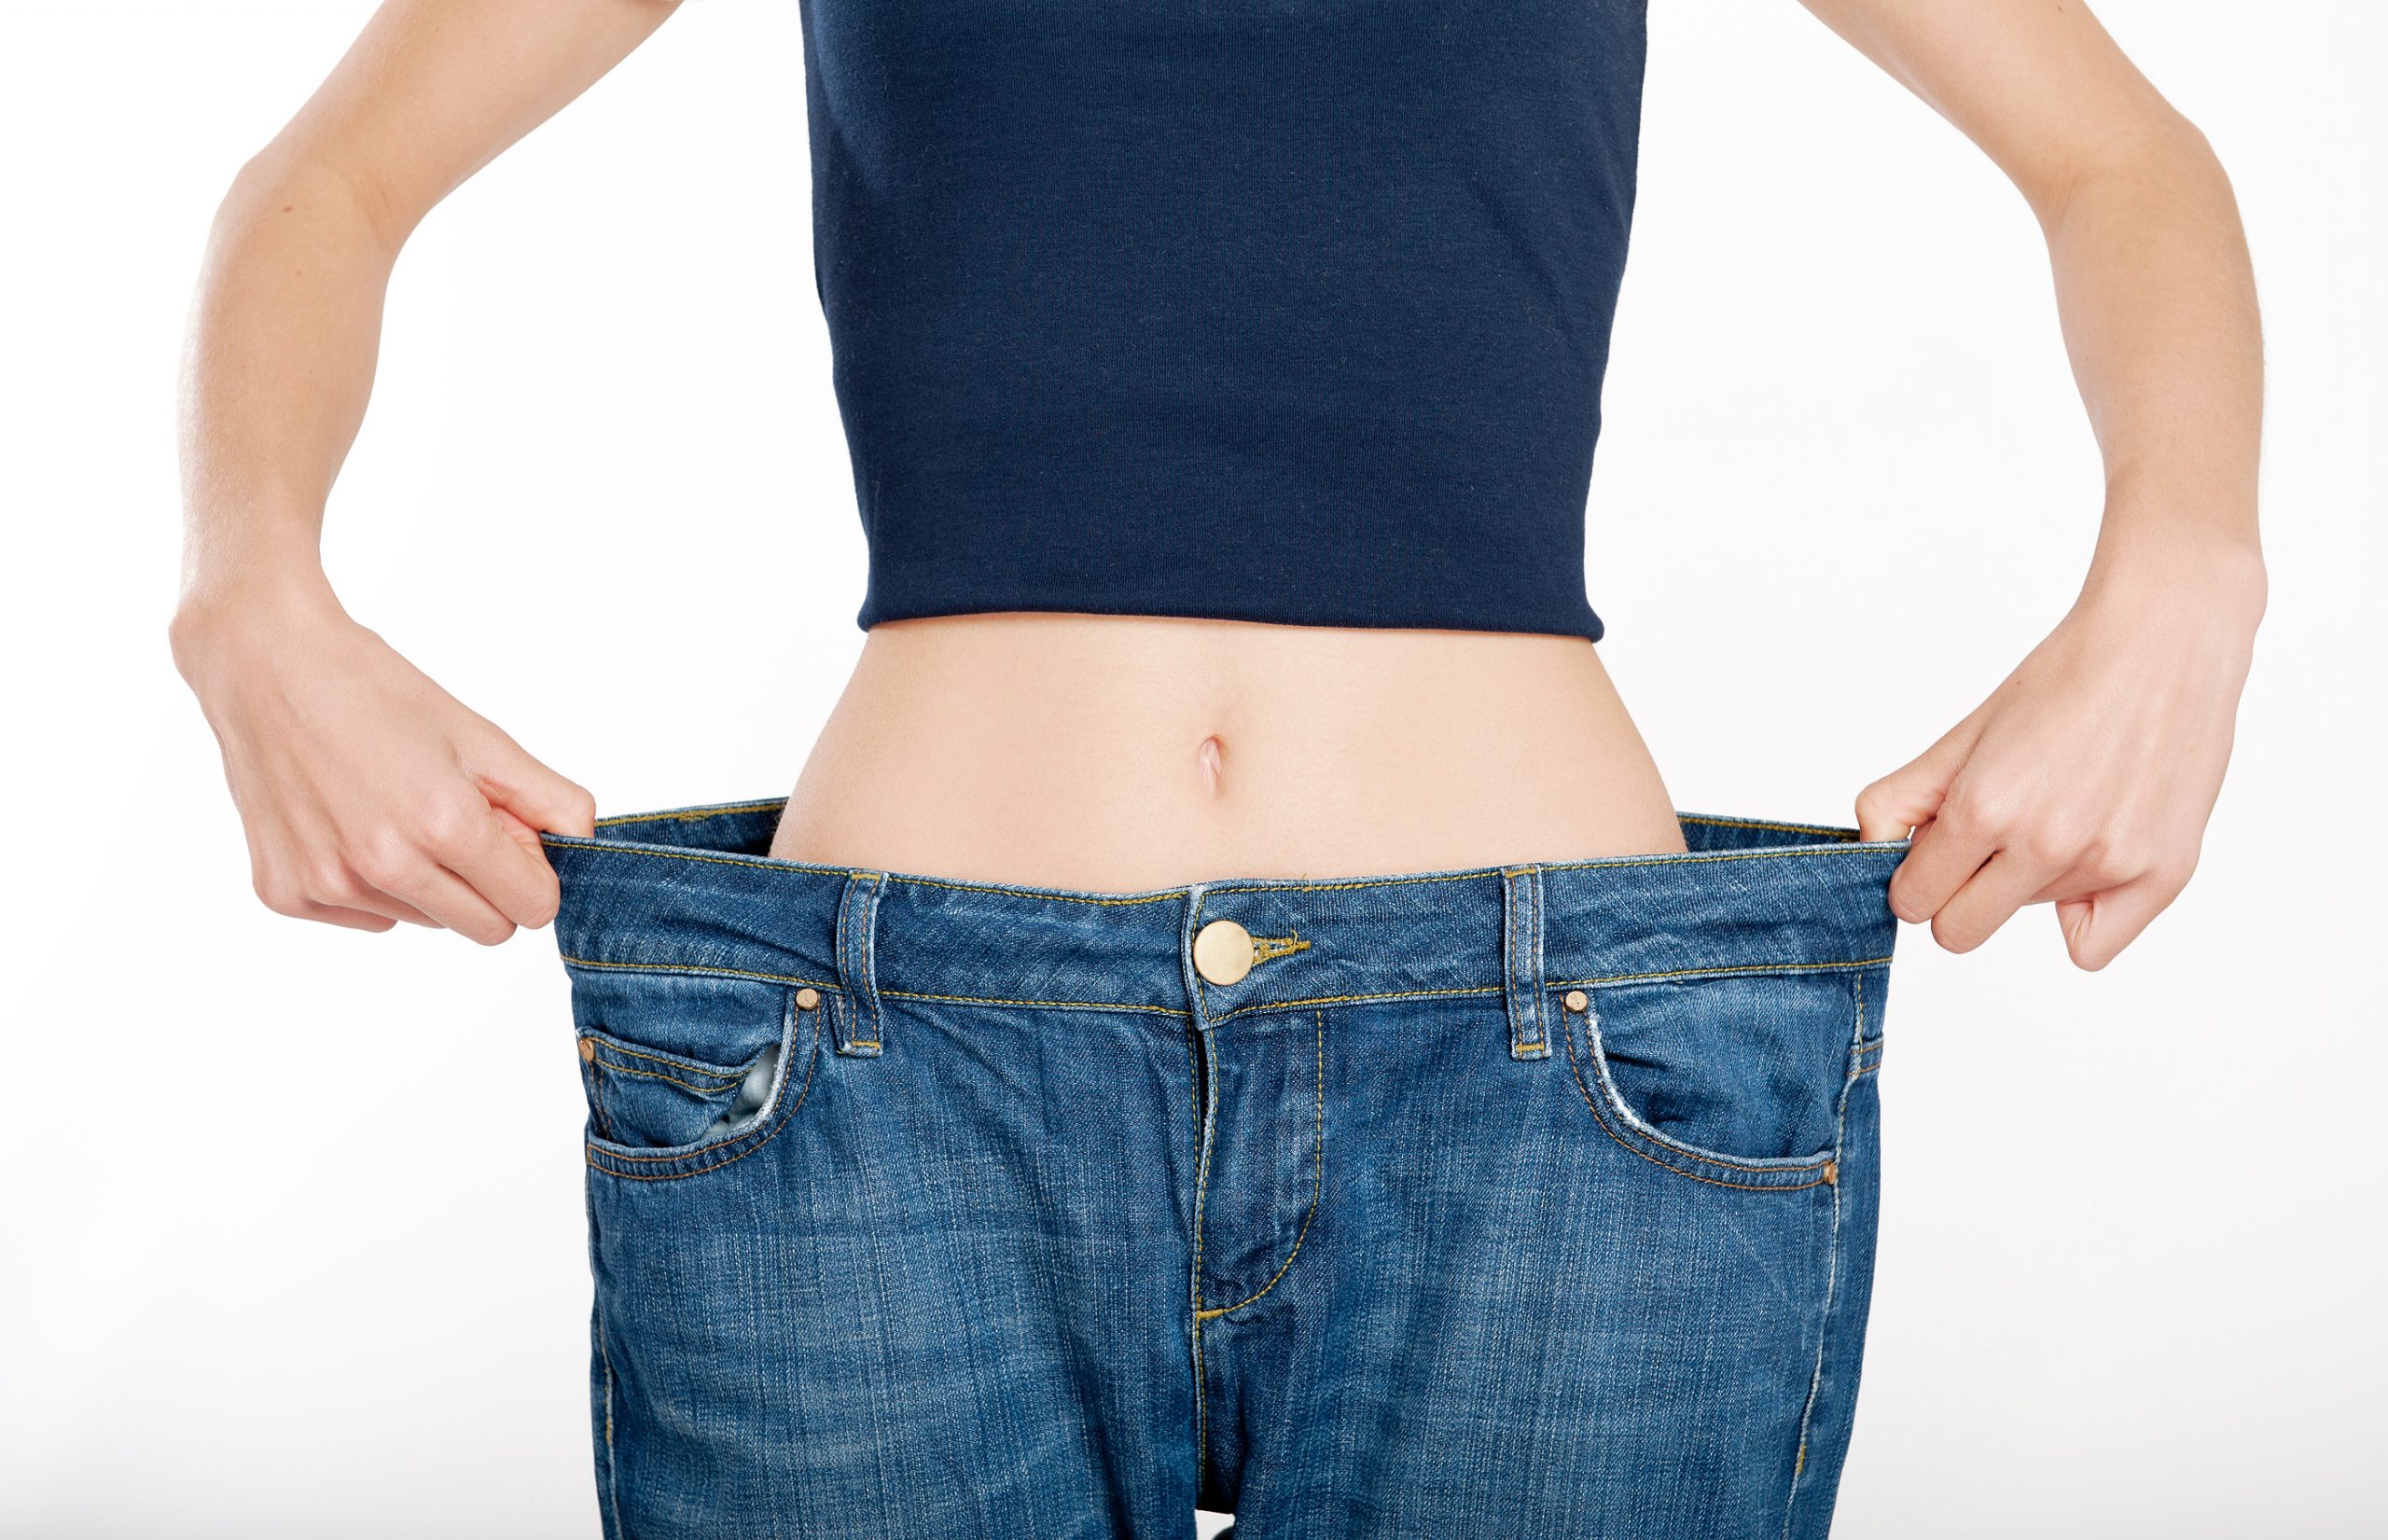 Weight Loss Service near Me Slimming Centres